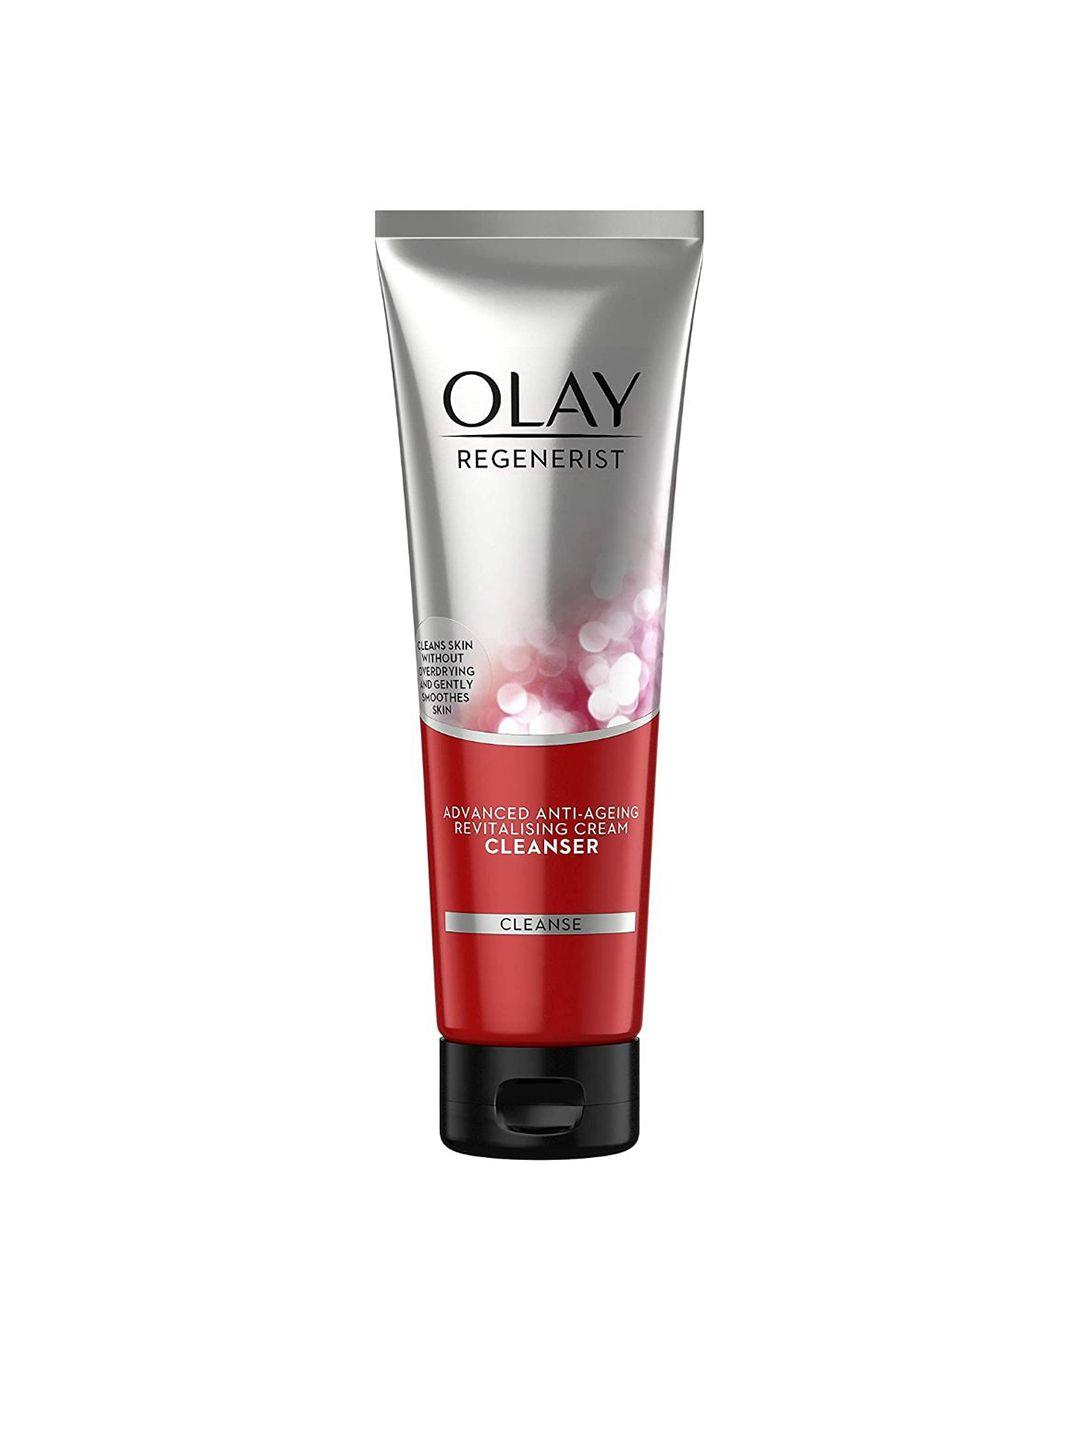 olay regenerist cleanser & face wash for plump & bouncy skin - 100g